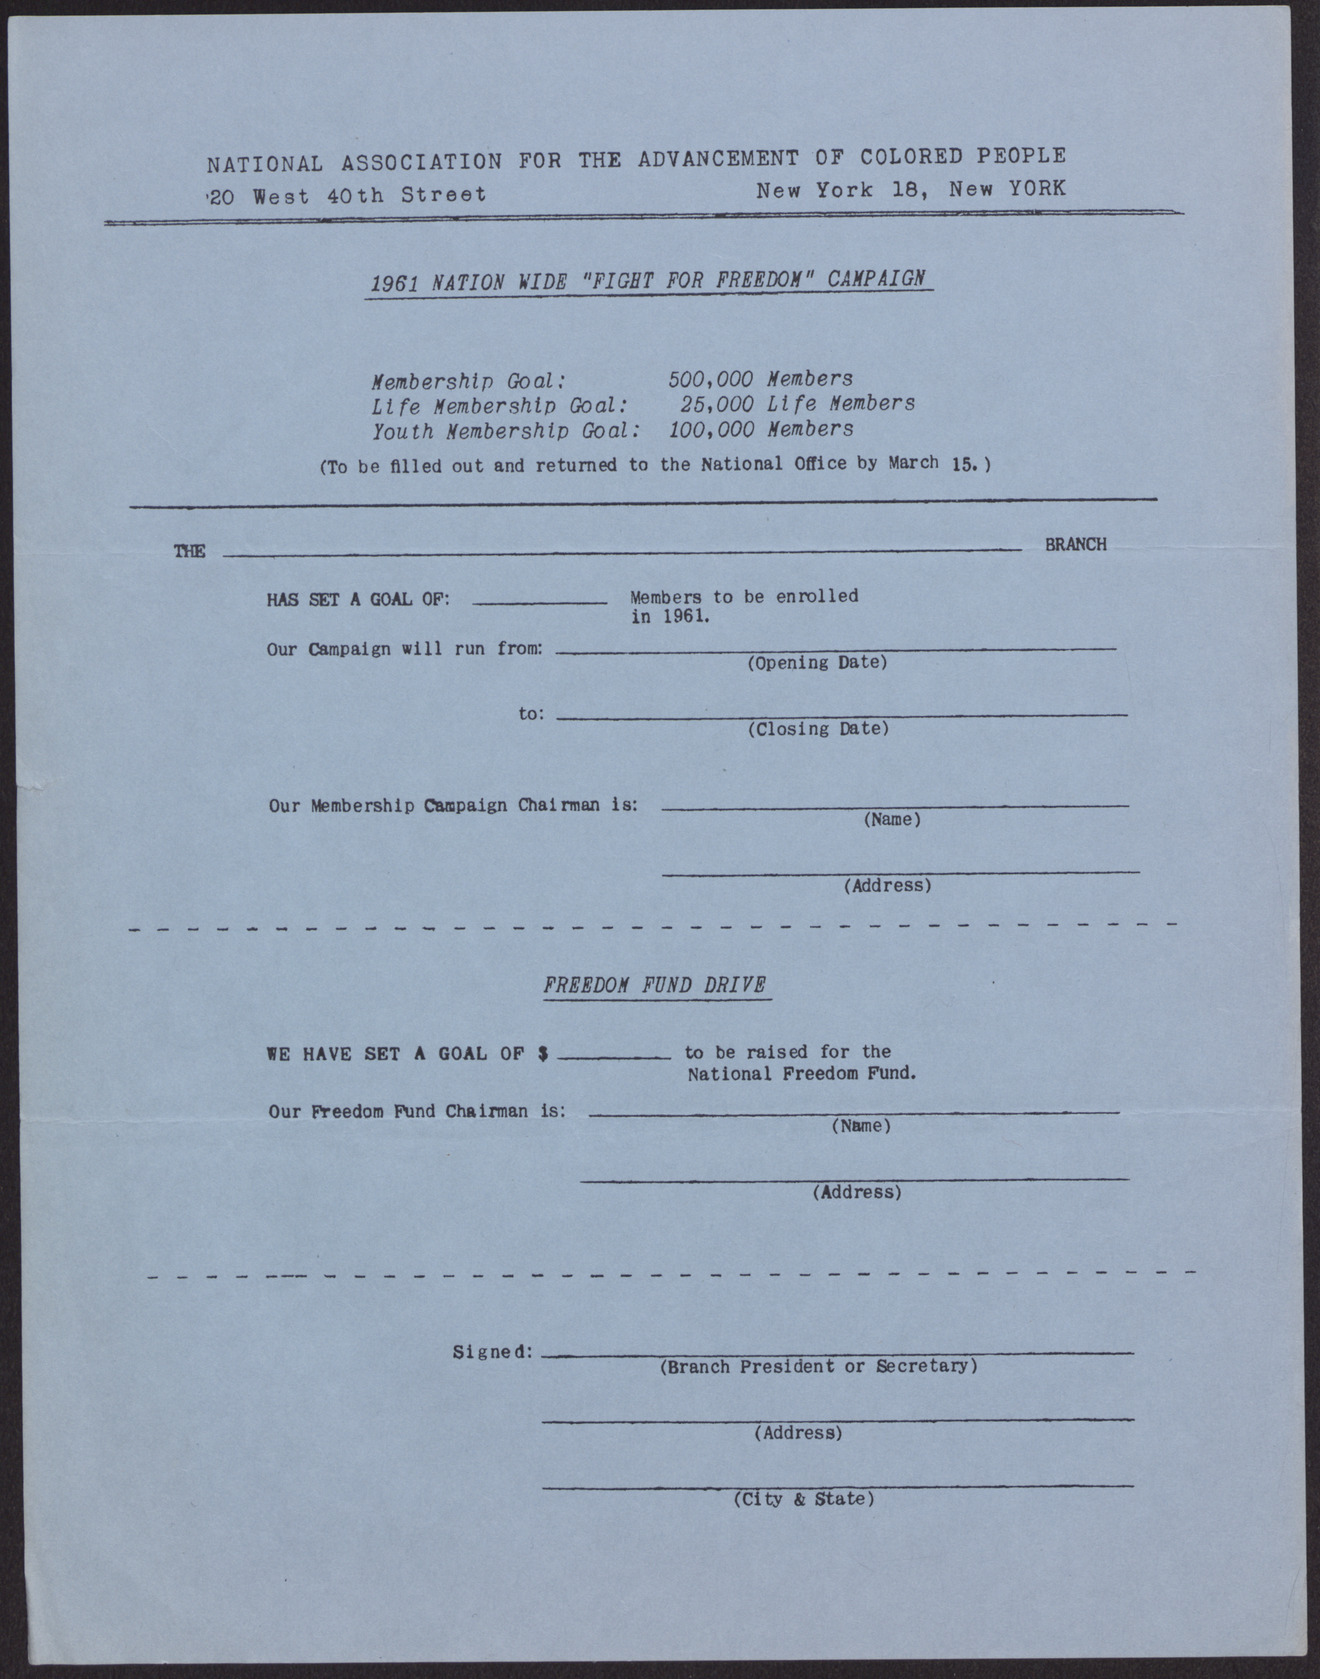 Blank form for the 1961 Nationwide "Fight for Freedom" Campaign